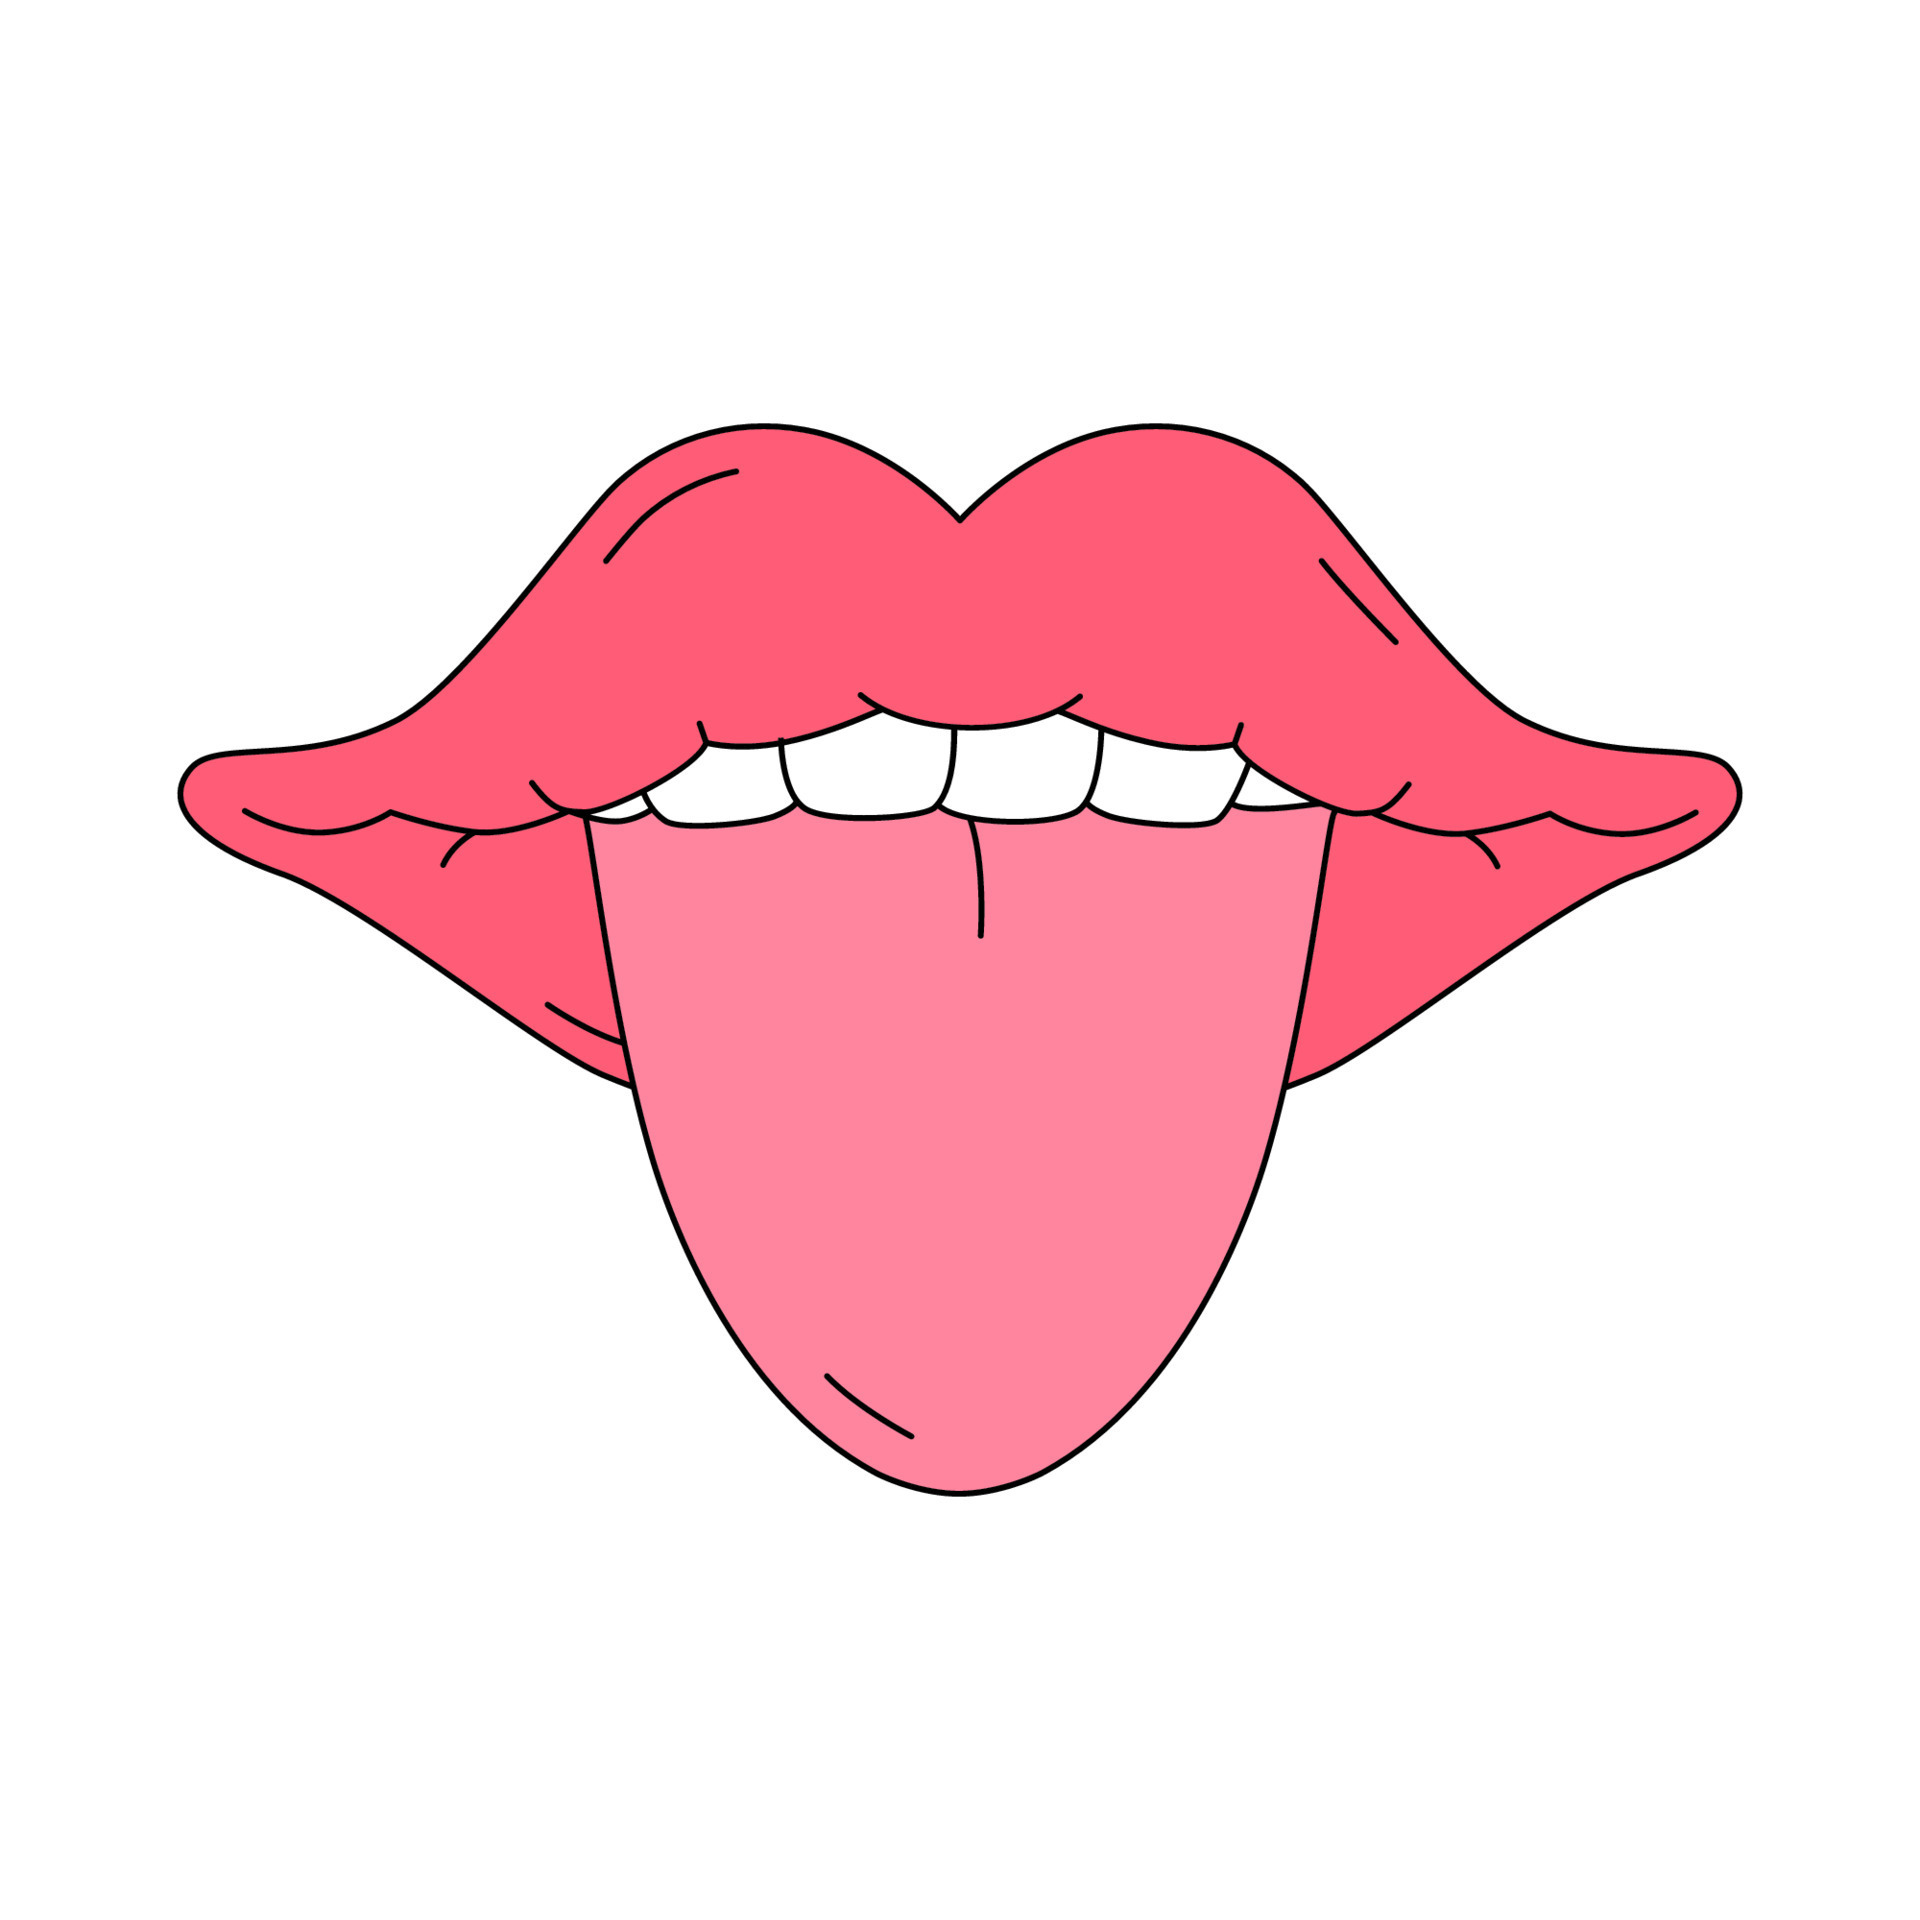 Open Mouth With Tongue Sticking Out In Traditional Cartoon Style